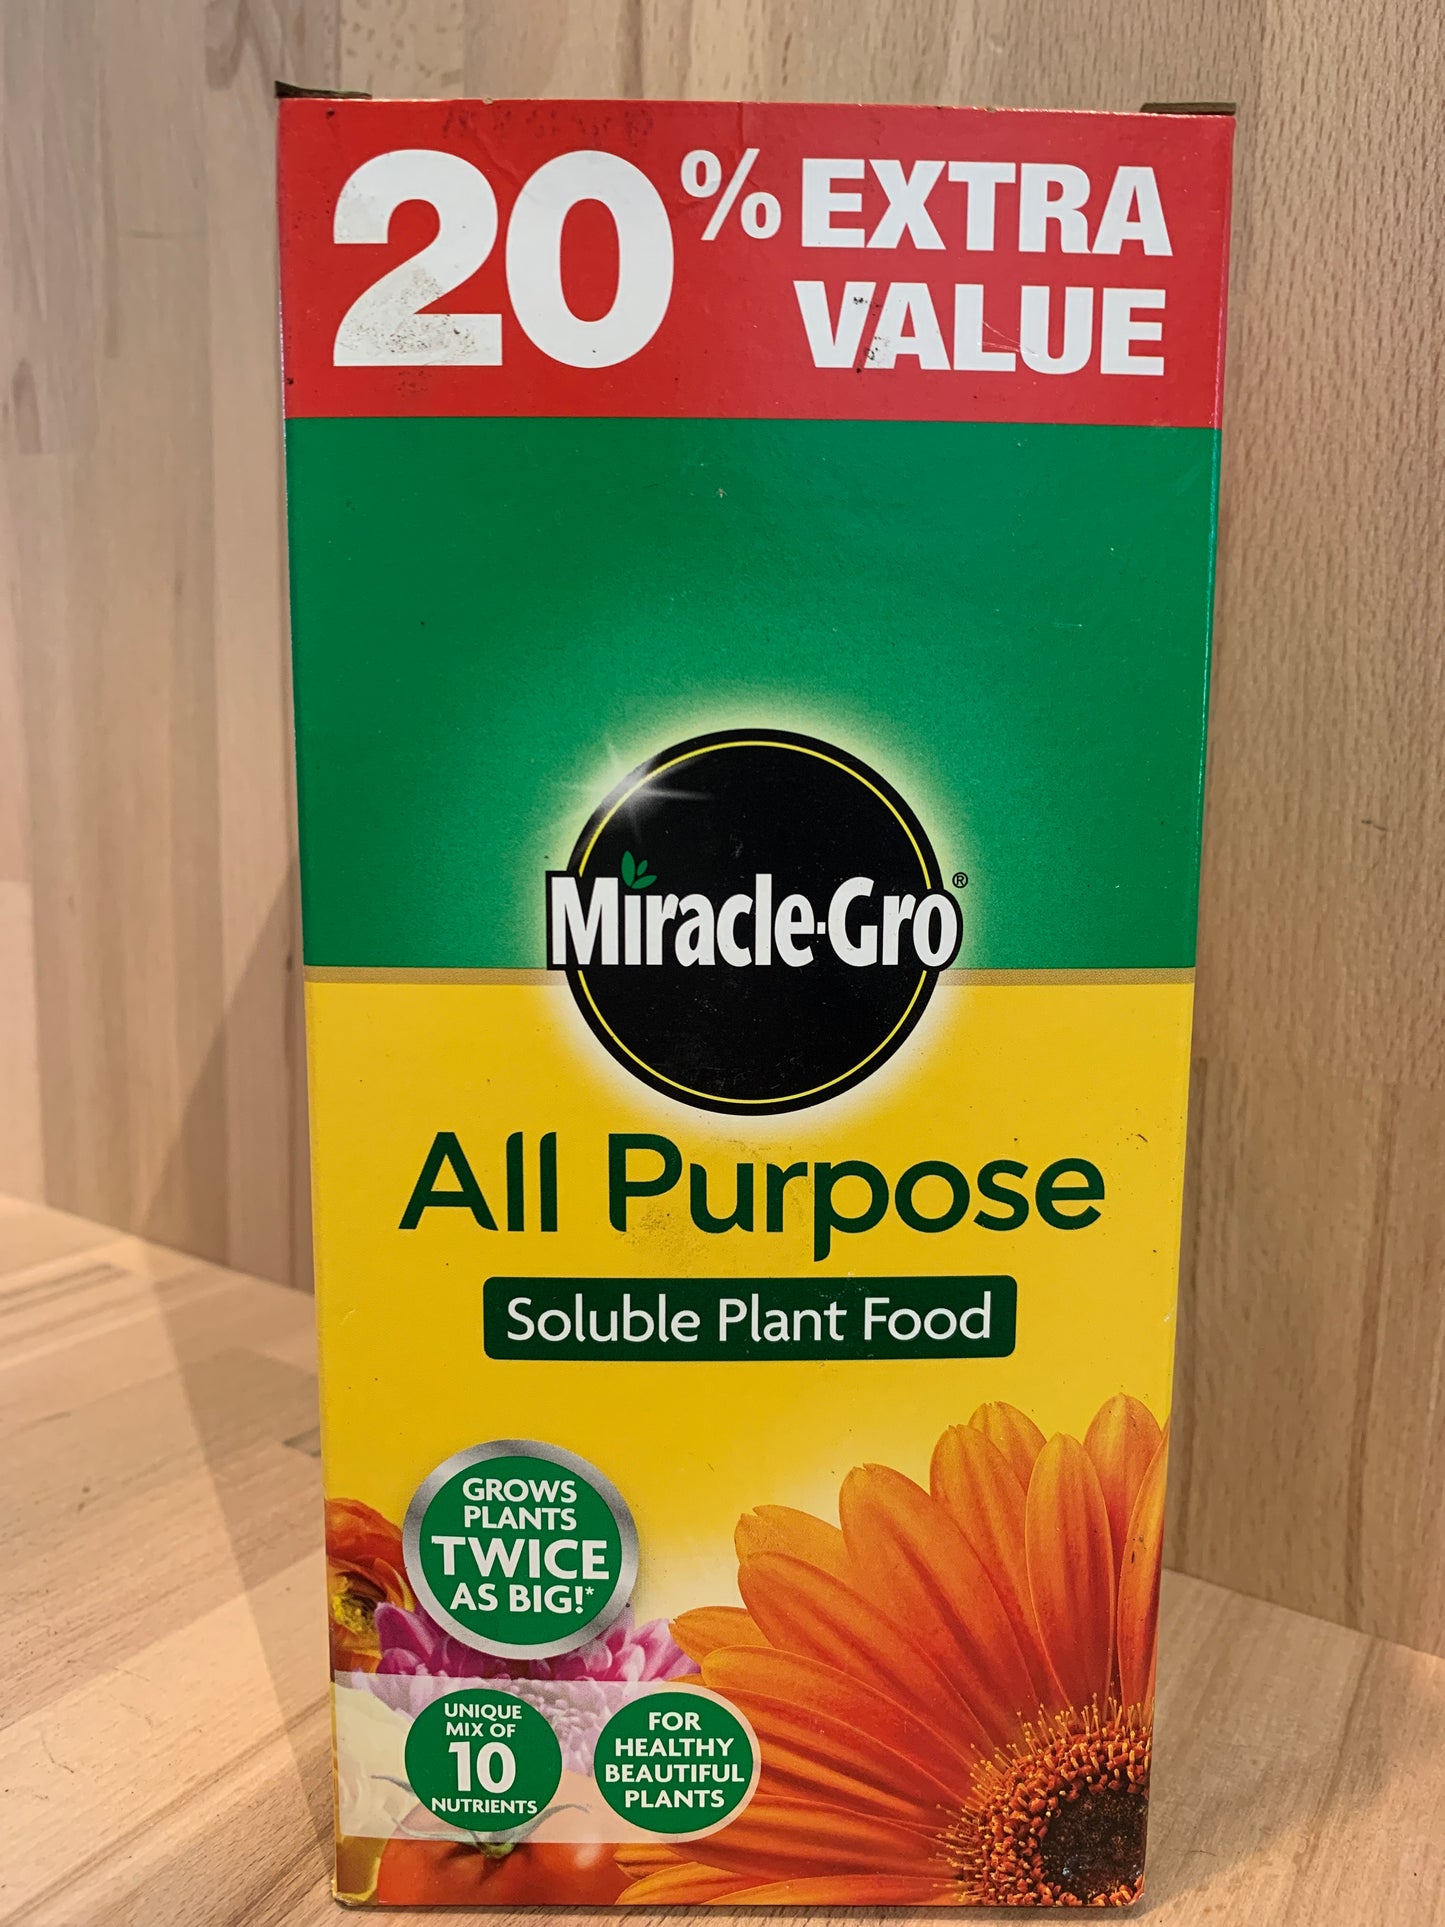 Miracle-Gro All Purpose Soluble Plant Food@